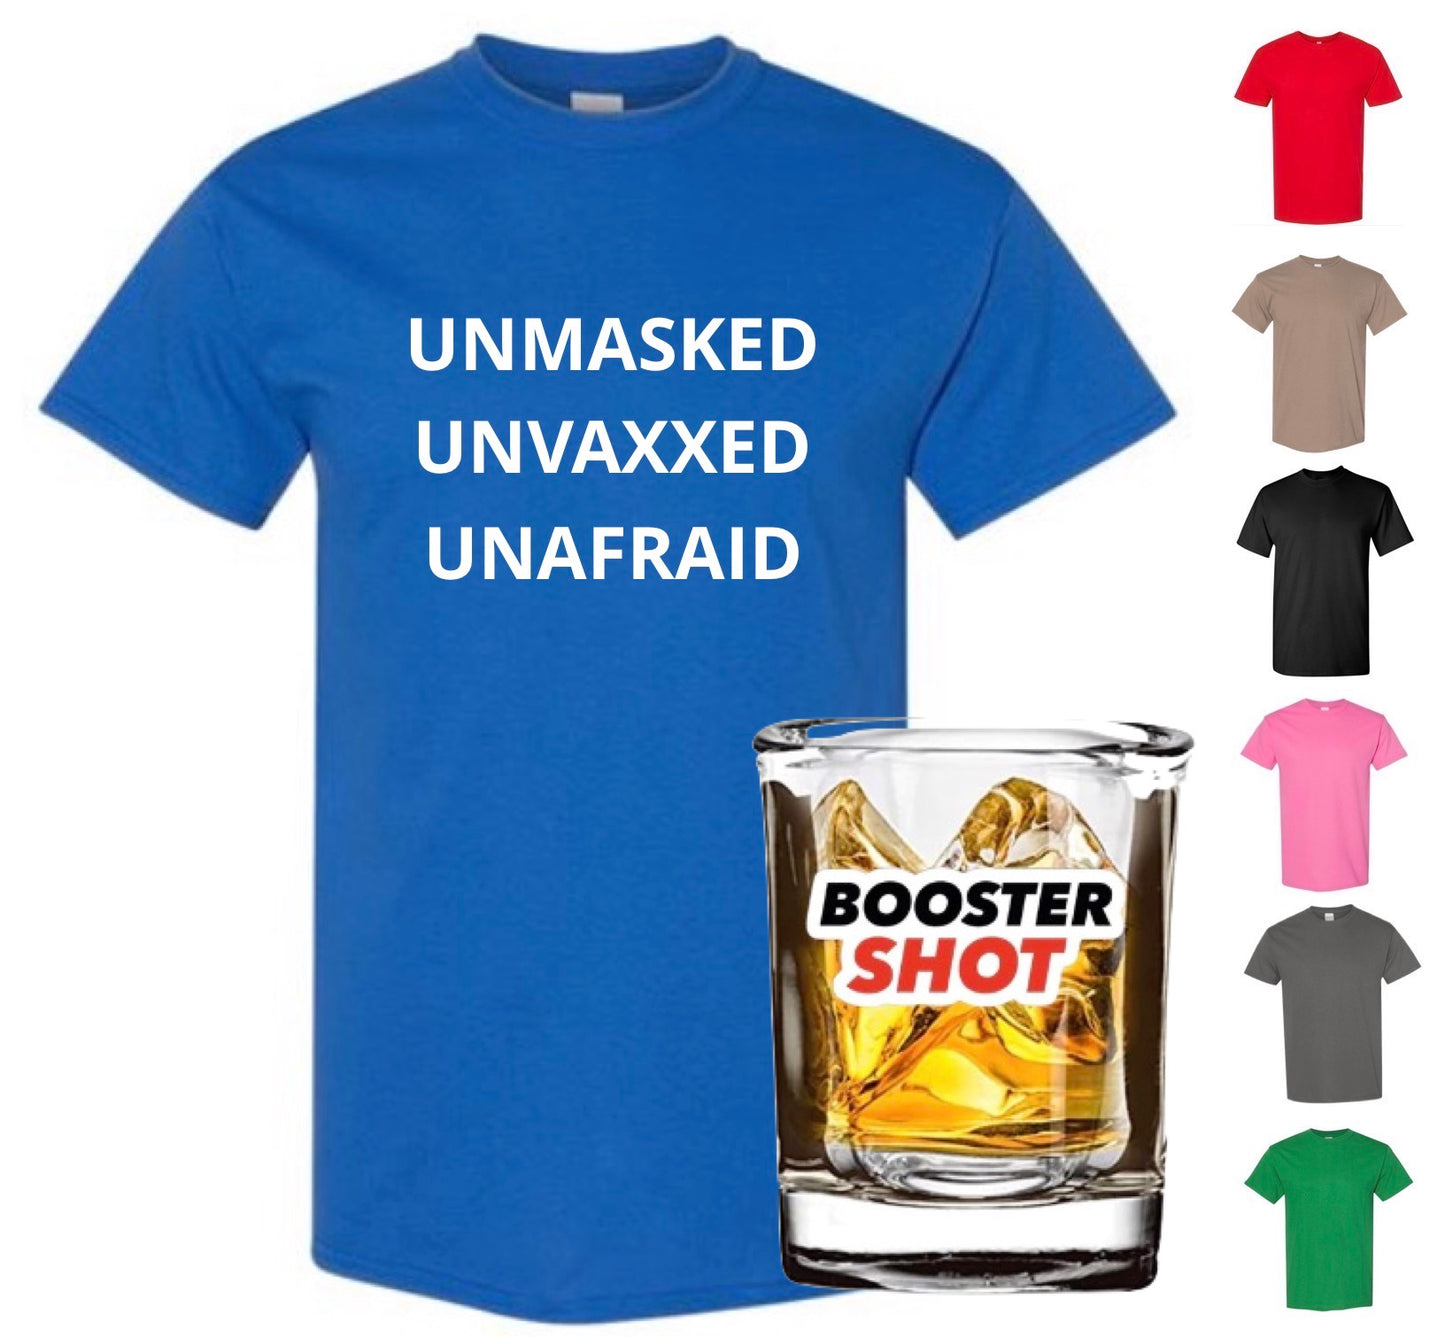 Unmasked, Unvaxxed, And Unafraid (with FREE Booster & FREE Shipping)